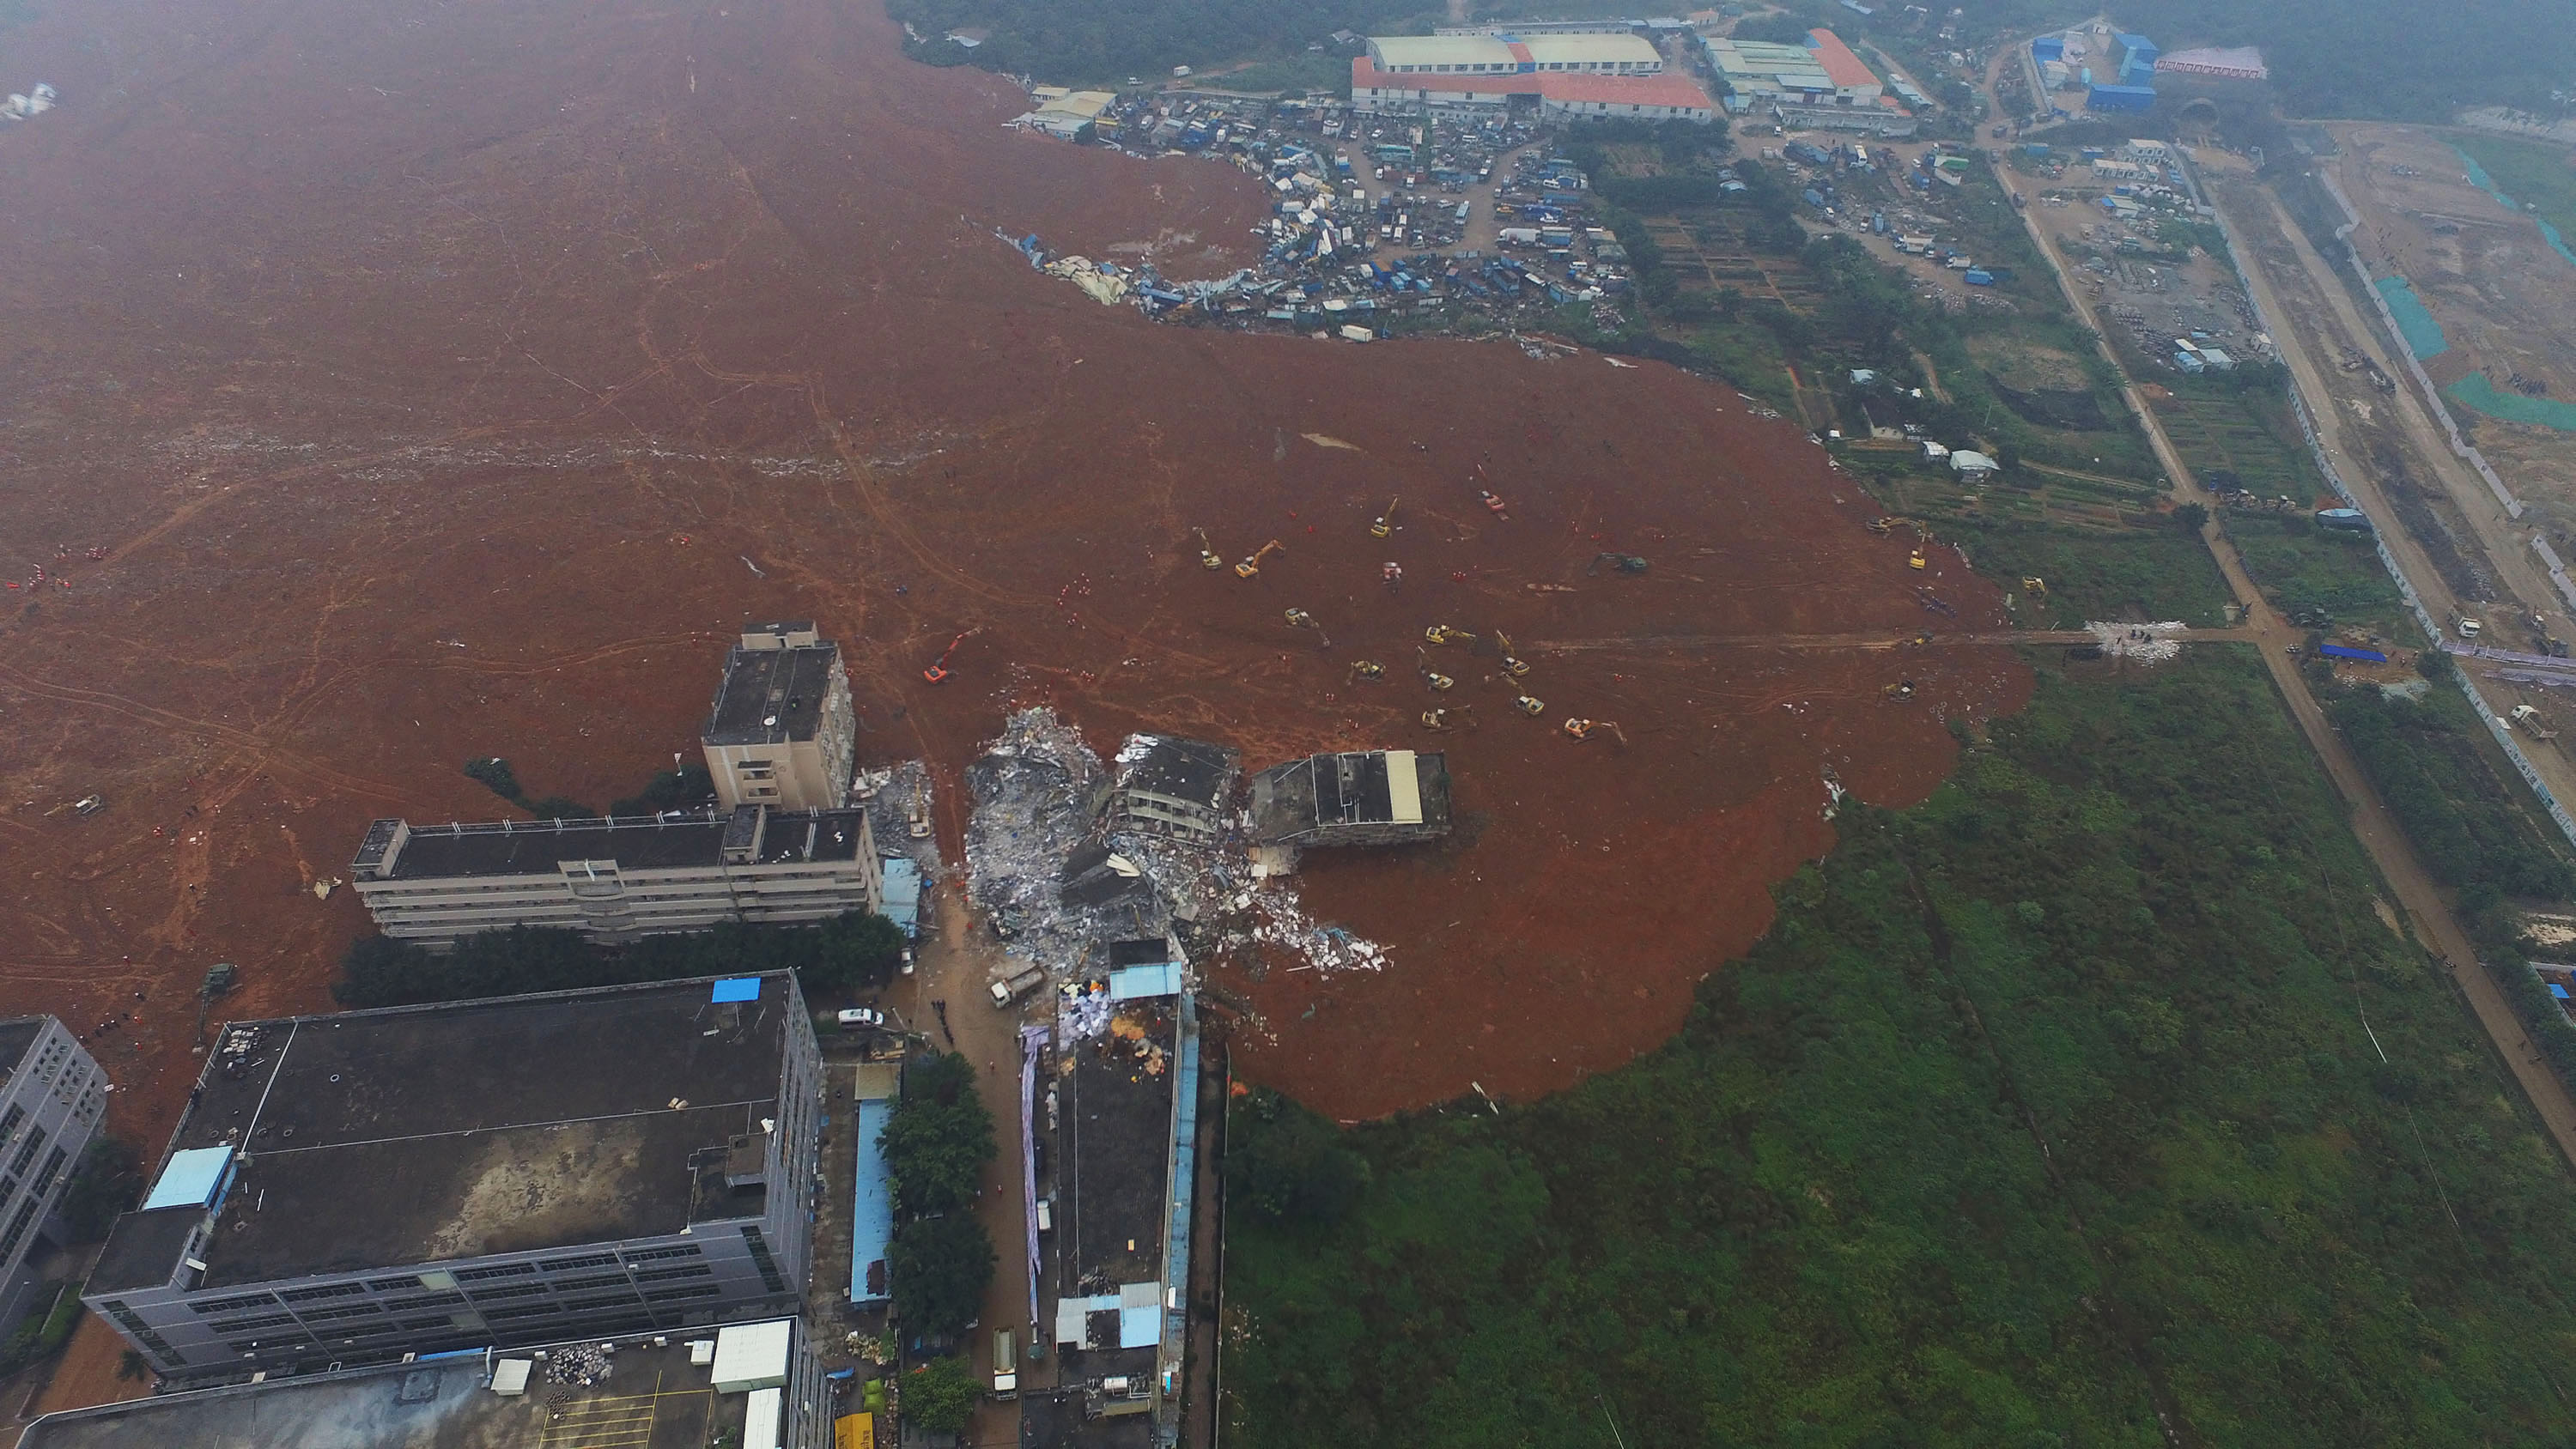 (151221) -- SHENZHEN, Dec. 21, 2015 (Xinhua) -- An aerial photo taken on Dec. 21, 2015 shows the site of landslide at an industrial park in Shenzhen, south China's Guangdong Province. Ninety-one people remained missing as of Monday morning after the disaster caused by the collapse of a huge pile of construciton waste. (Xinhua/Mao Siqian) (lfj)